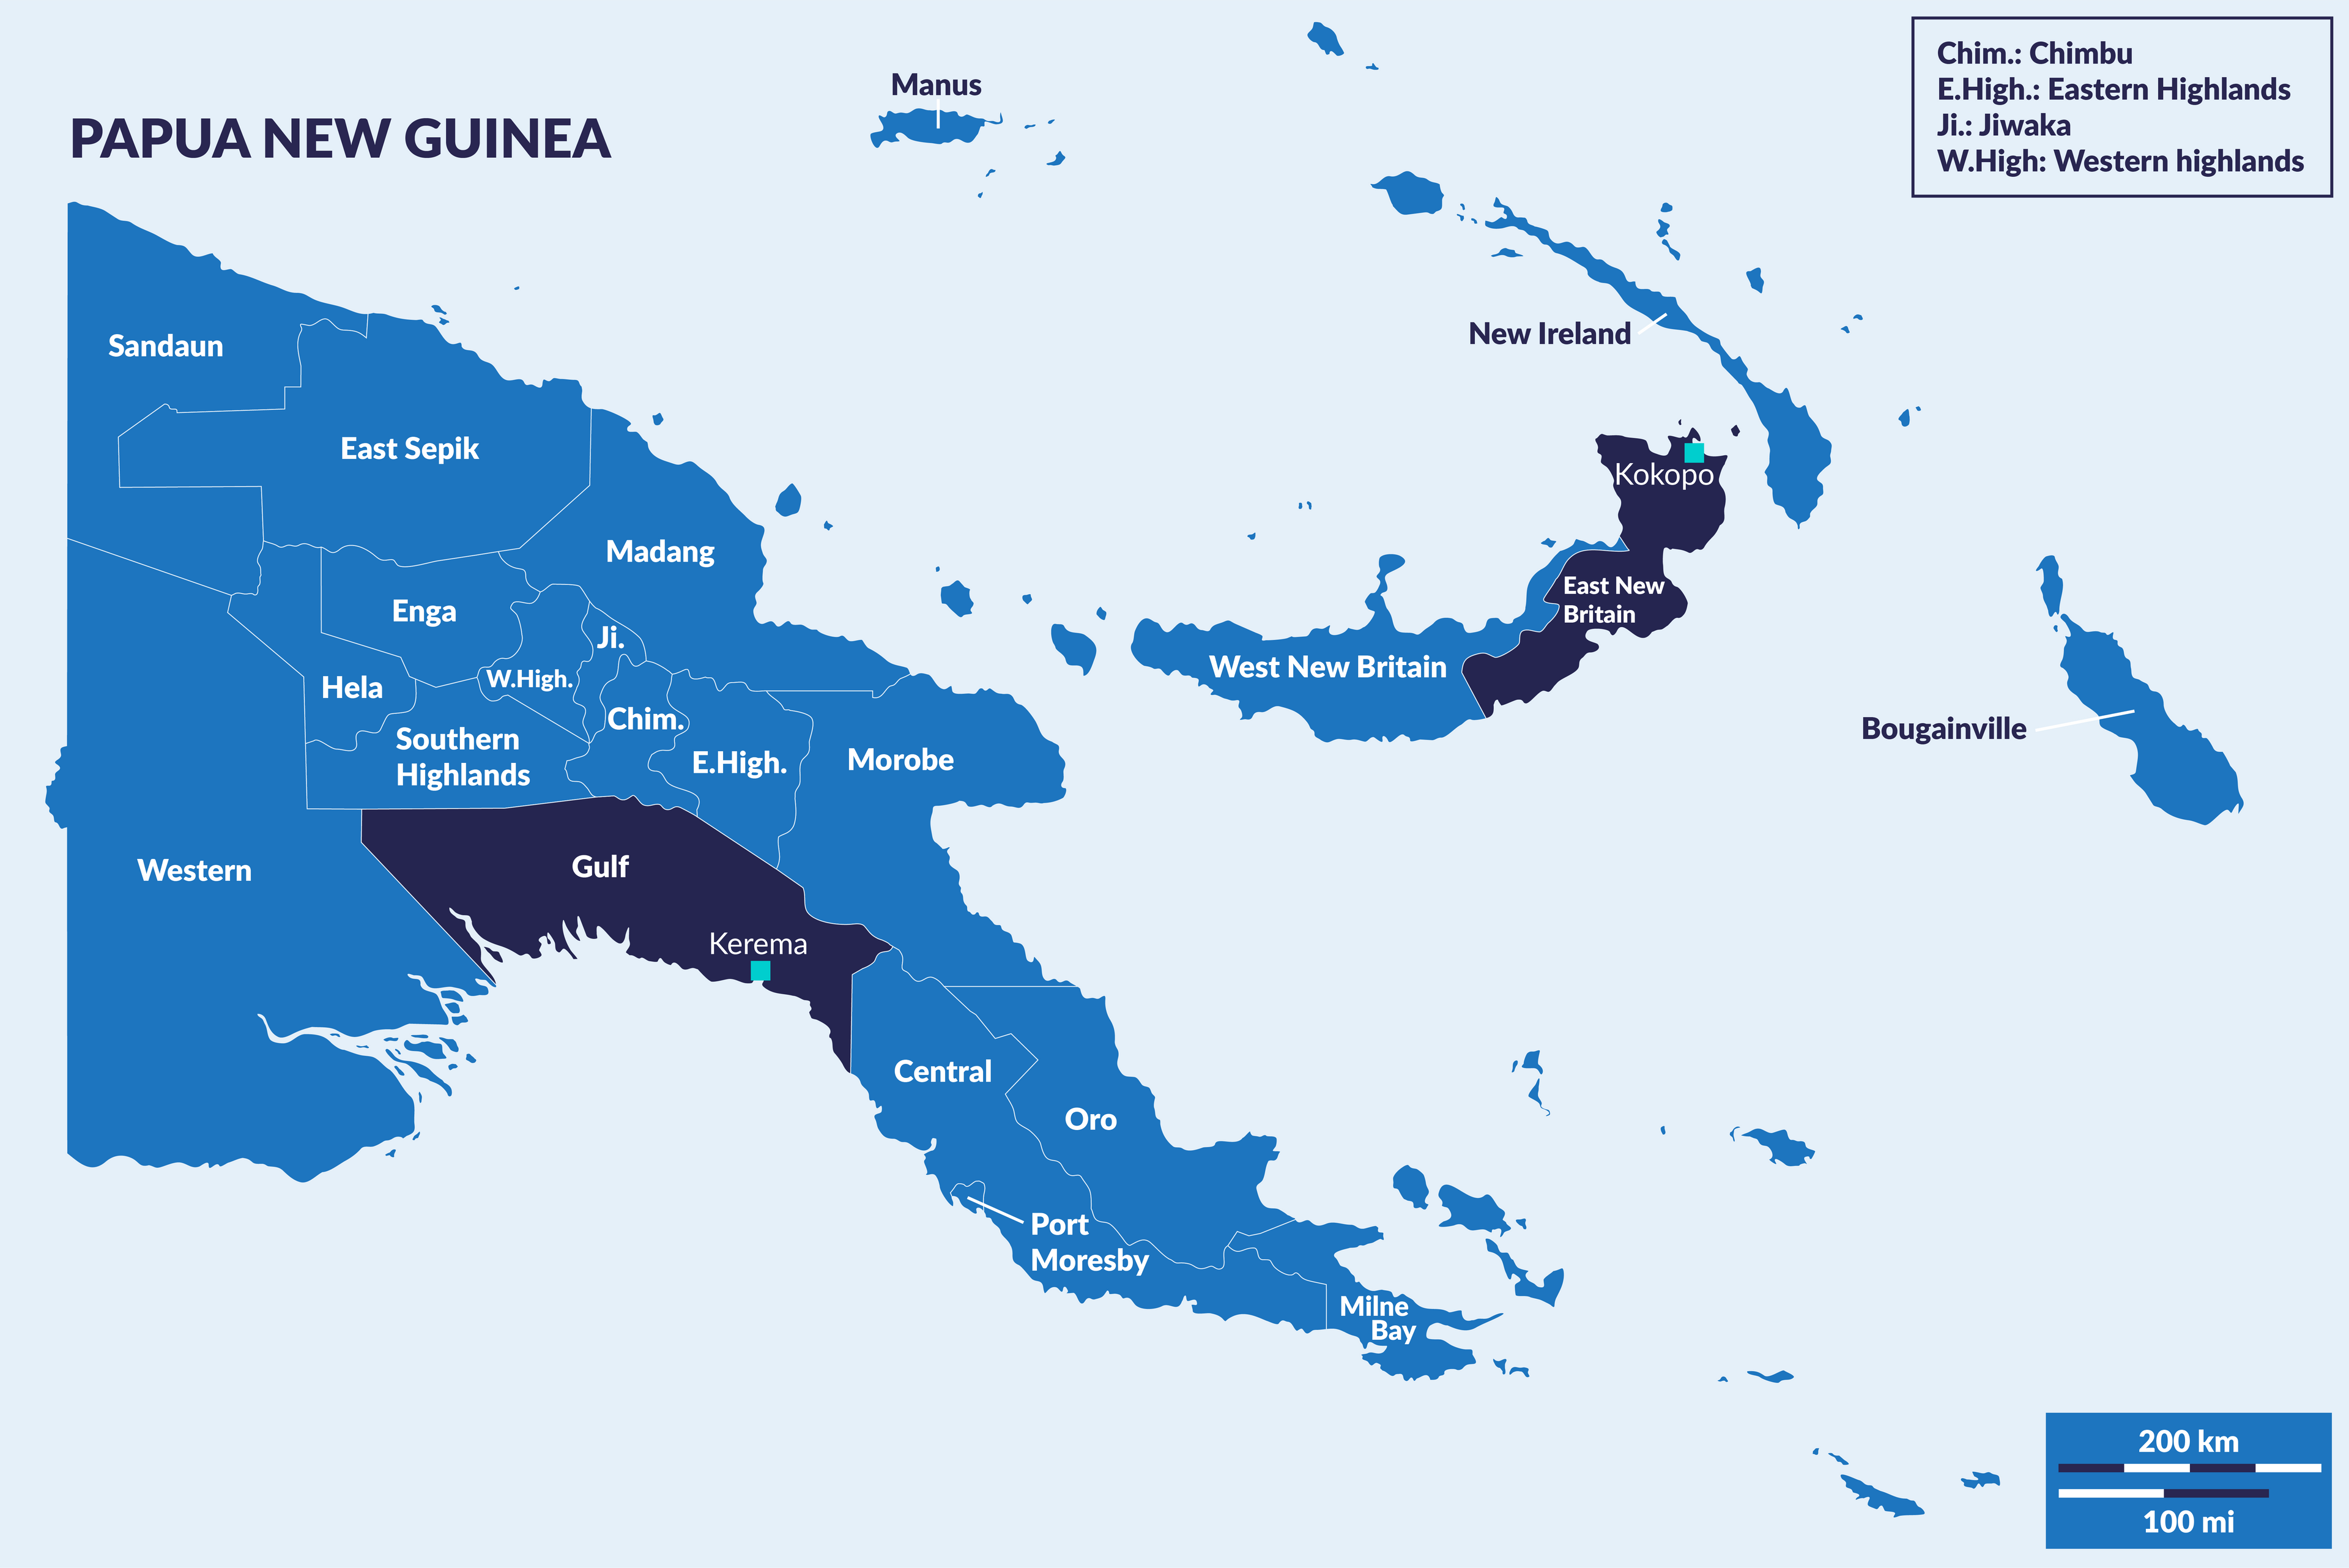 Map of PNG showing Gulf and East New Britain provinces